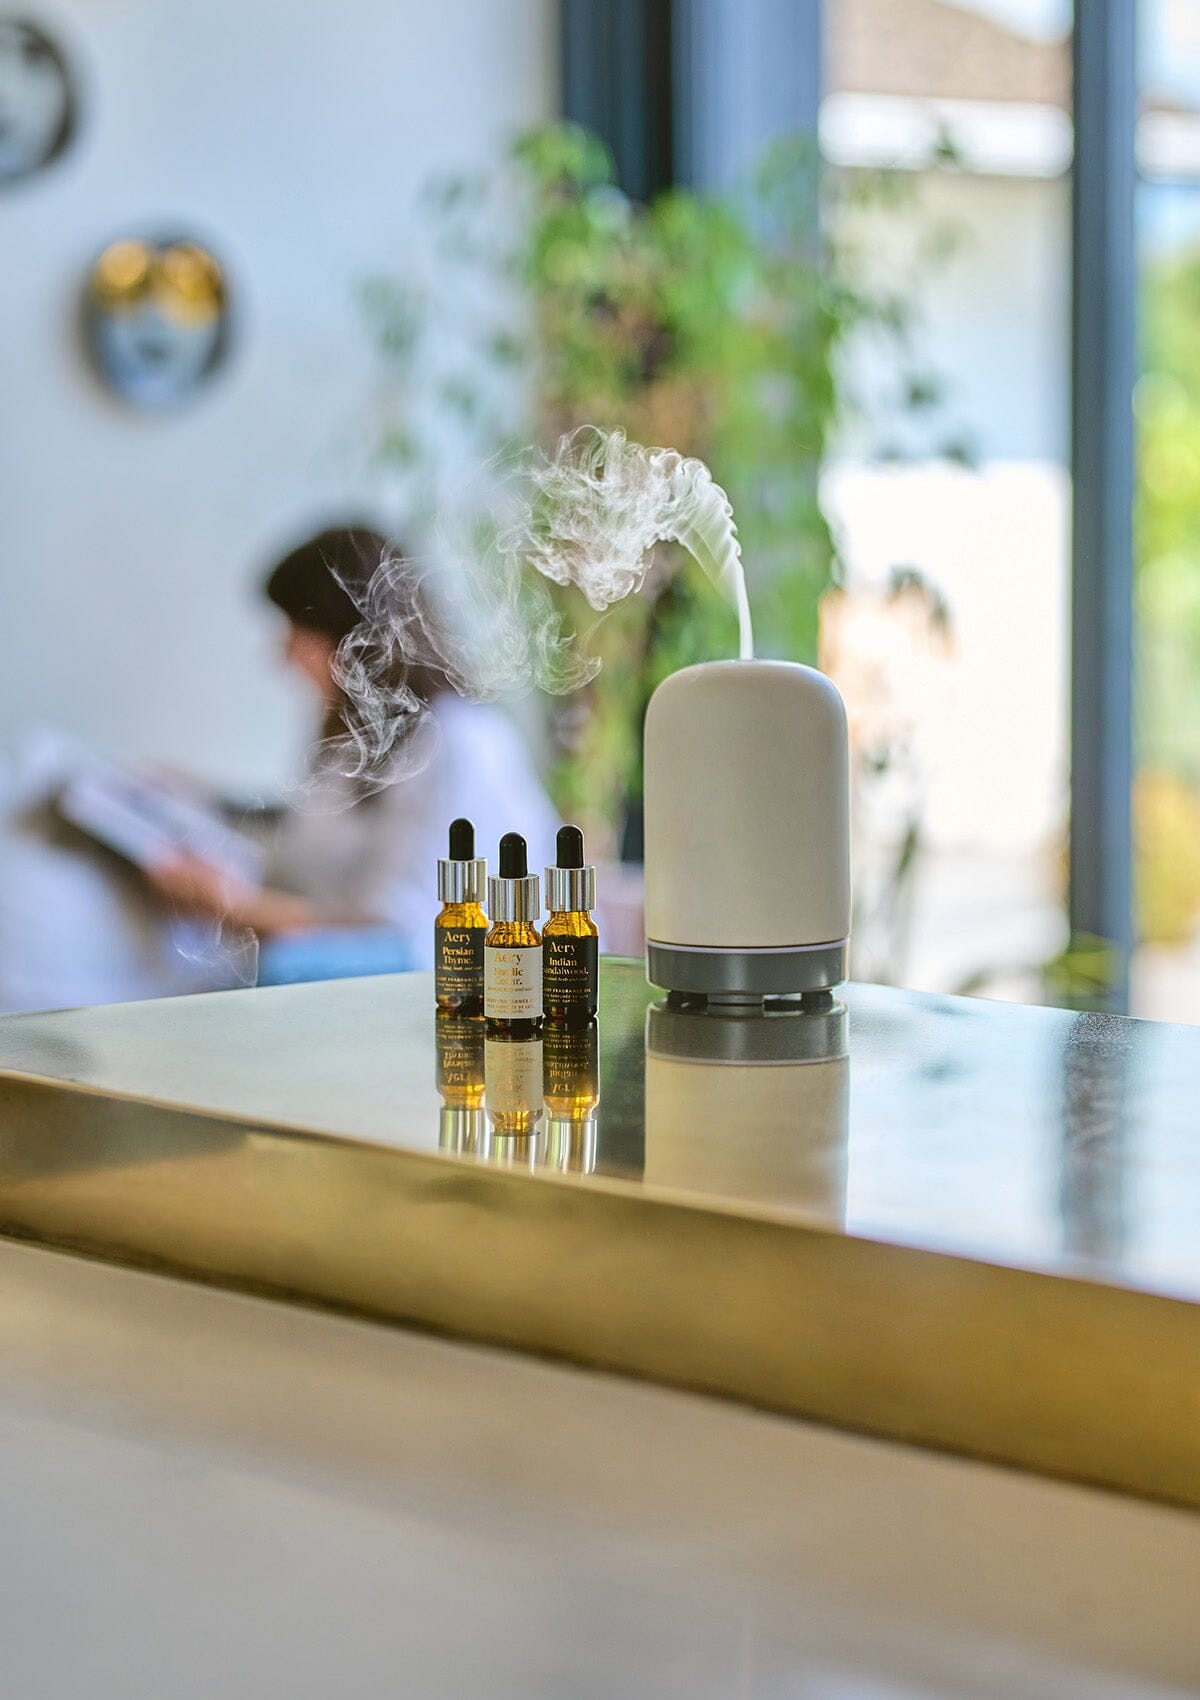 White Nordic Cedar fragrance oil by Aery displayed next to Indian Sandalwood and Persian Thyme fragrance oils and electric diffuser placed on gold kitchen worktop